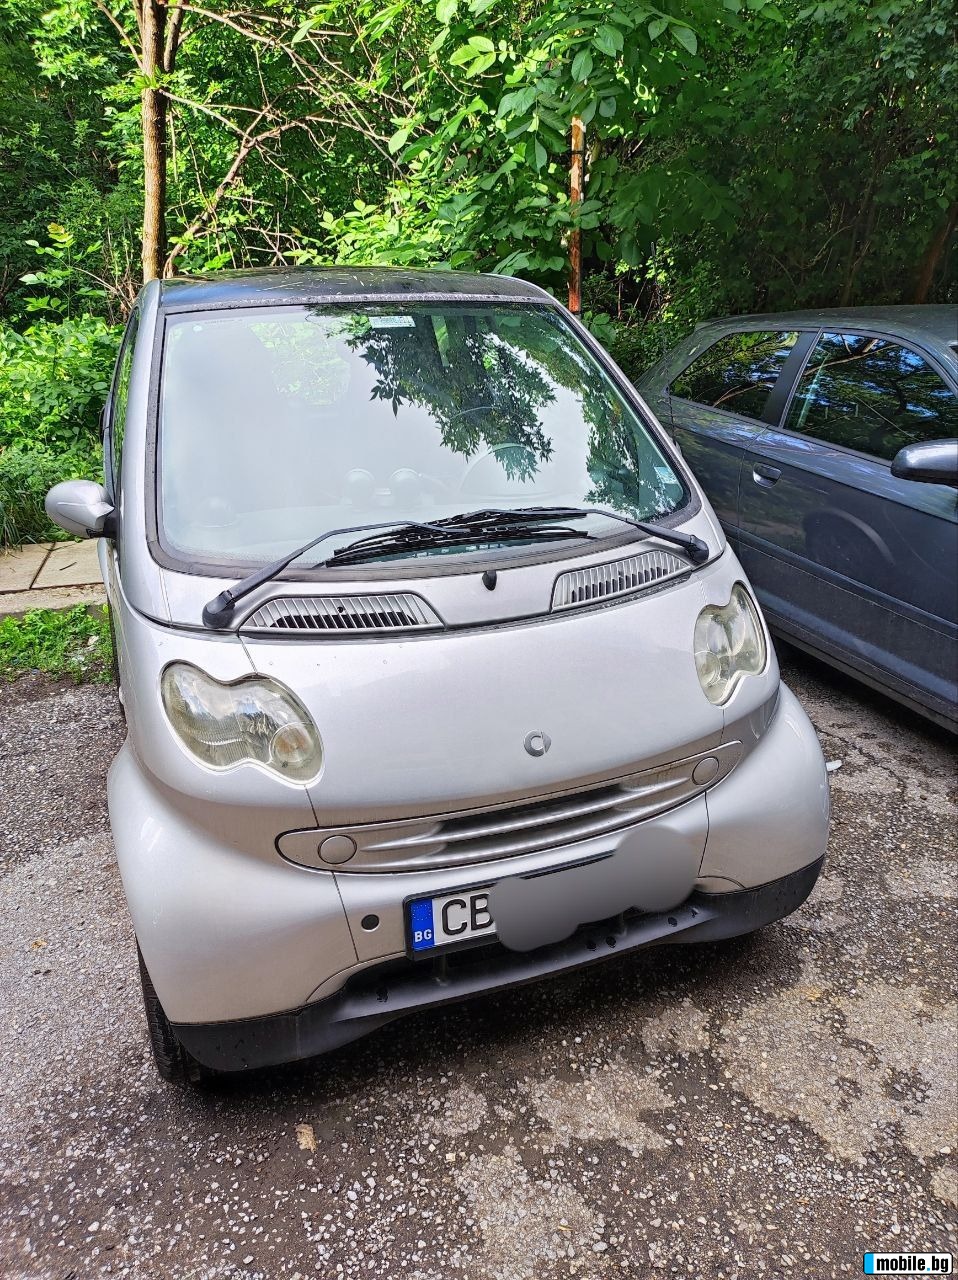 Smart Fortwo city-coupe | Mobile.bg   3